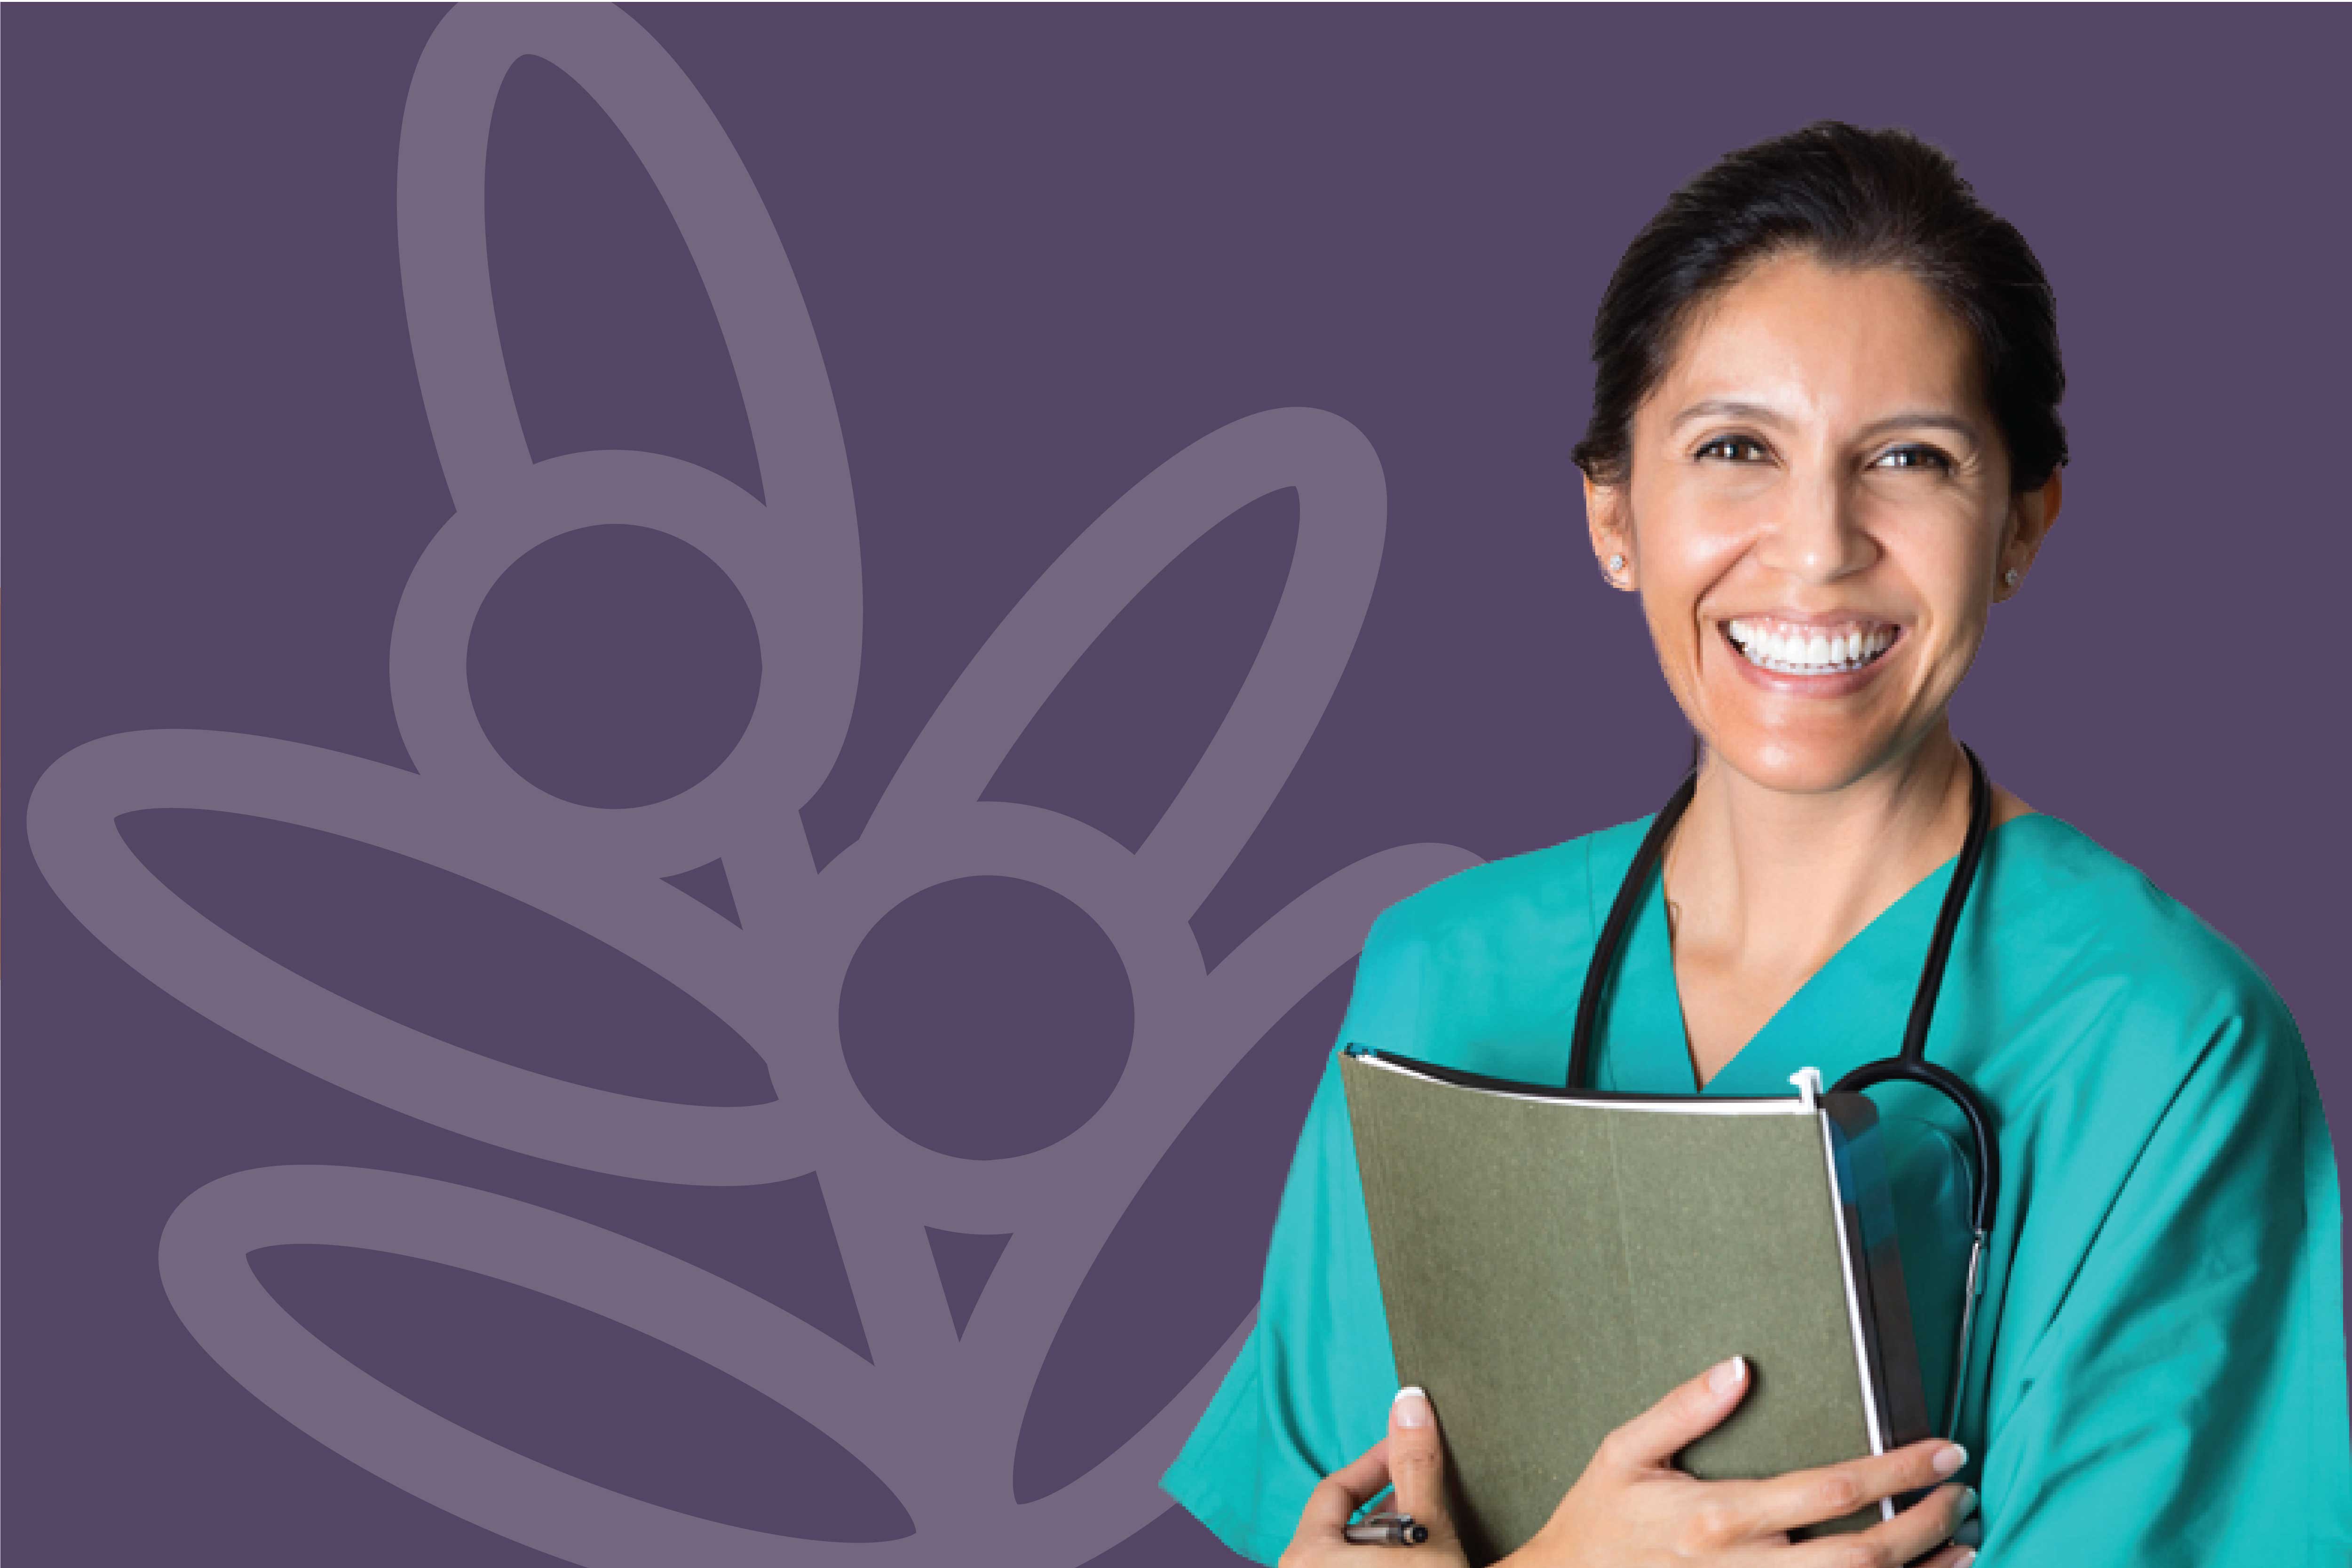 Nurse with paperwork standing in front of a purple wall with the acacia logo